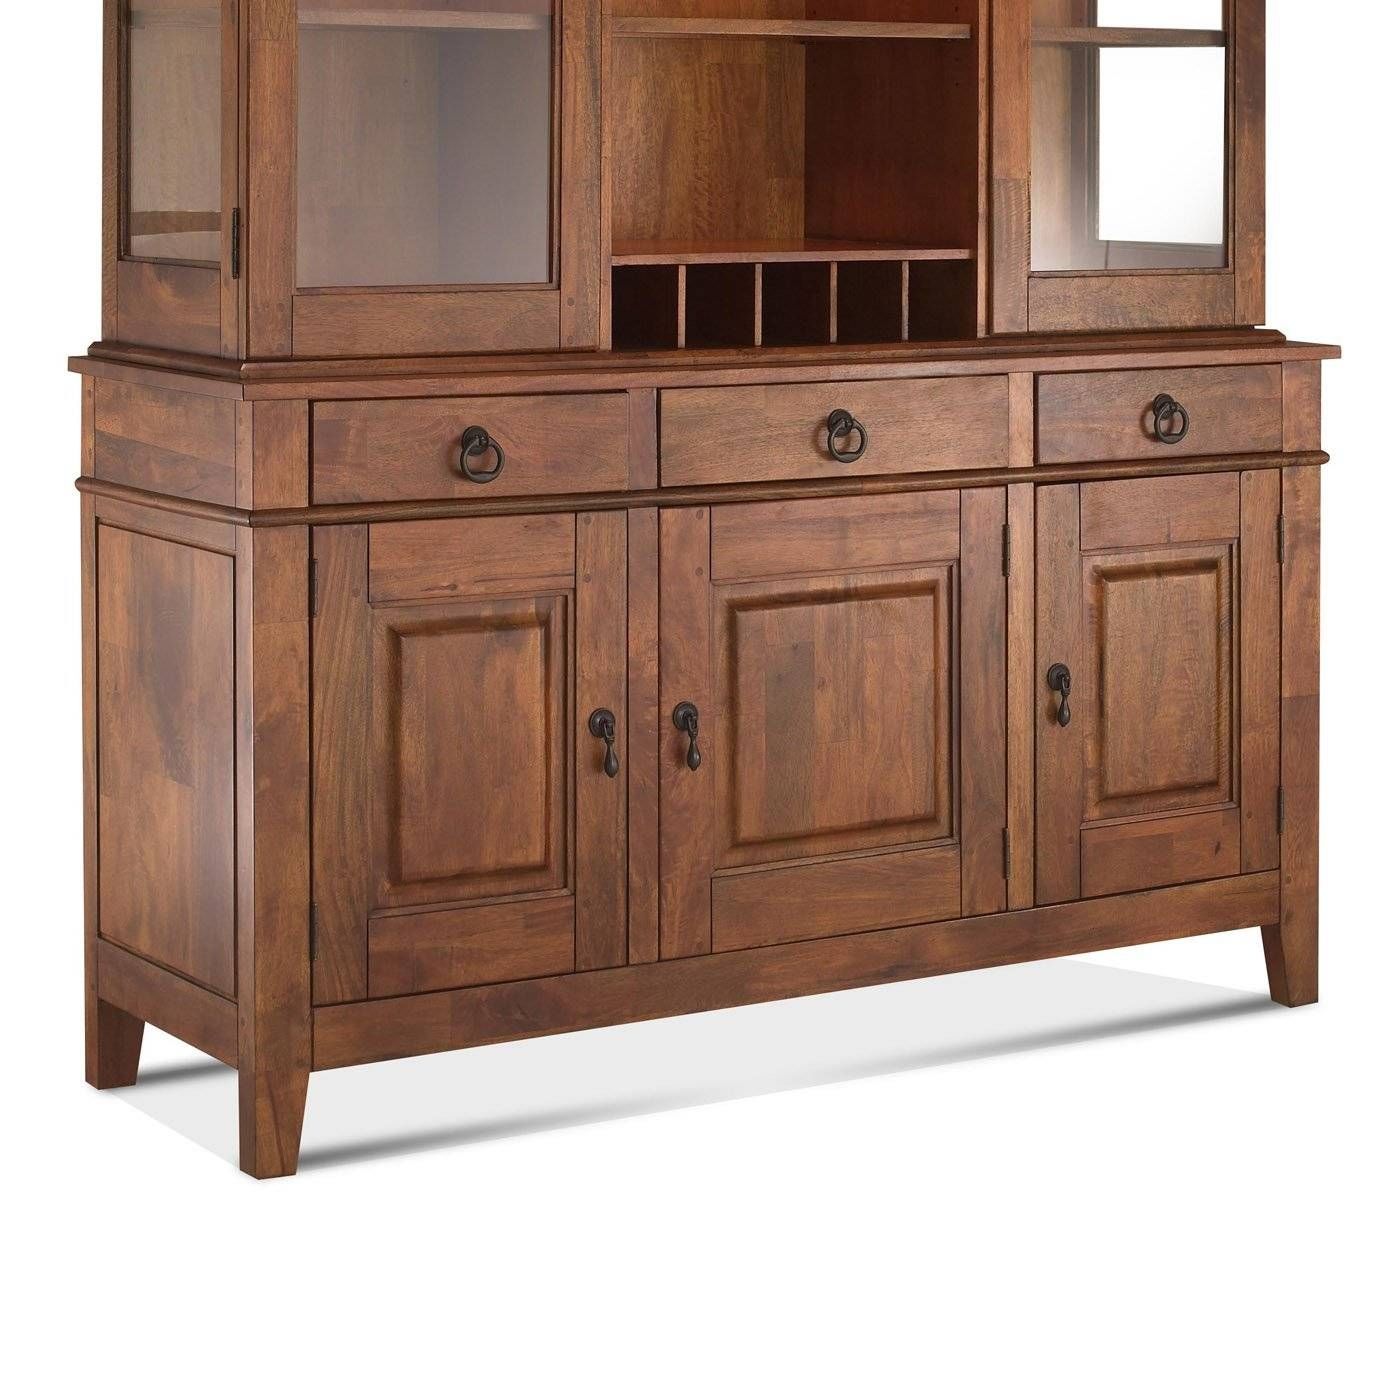 Unique Dining Room Buffets Sideboards – Bjdgjy Intended For Current Glass Door Buffet Sideboards (View 14 of 15)